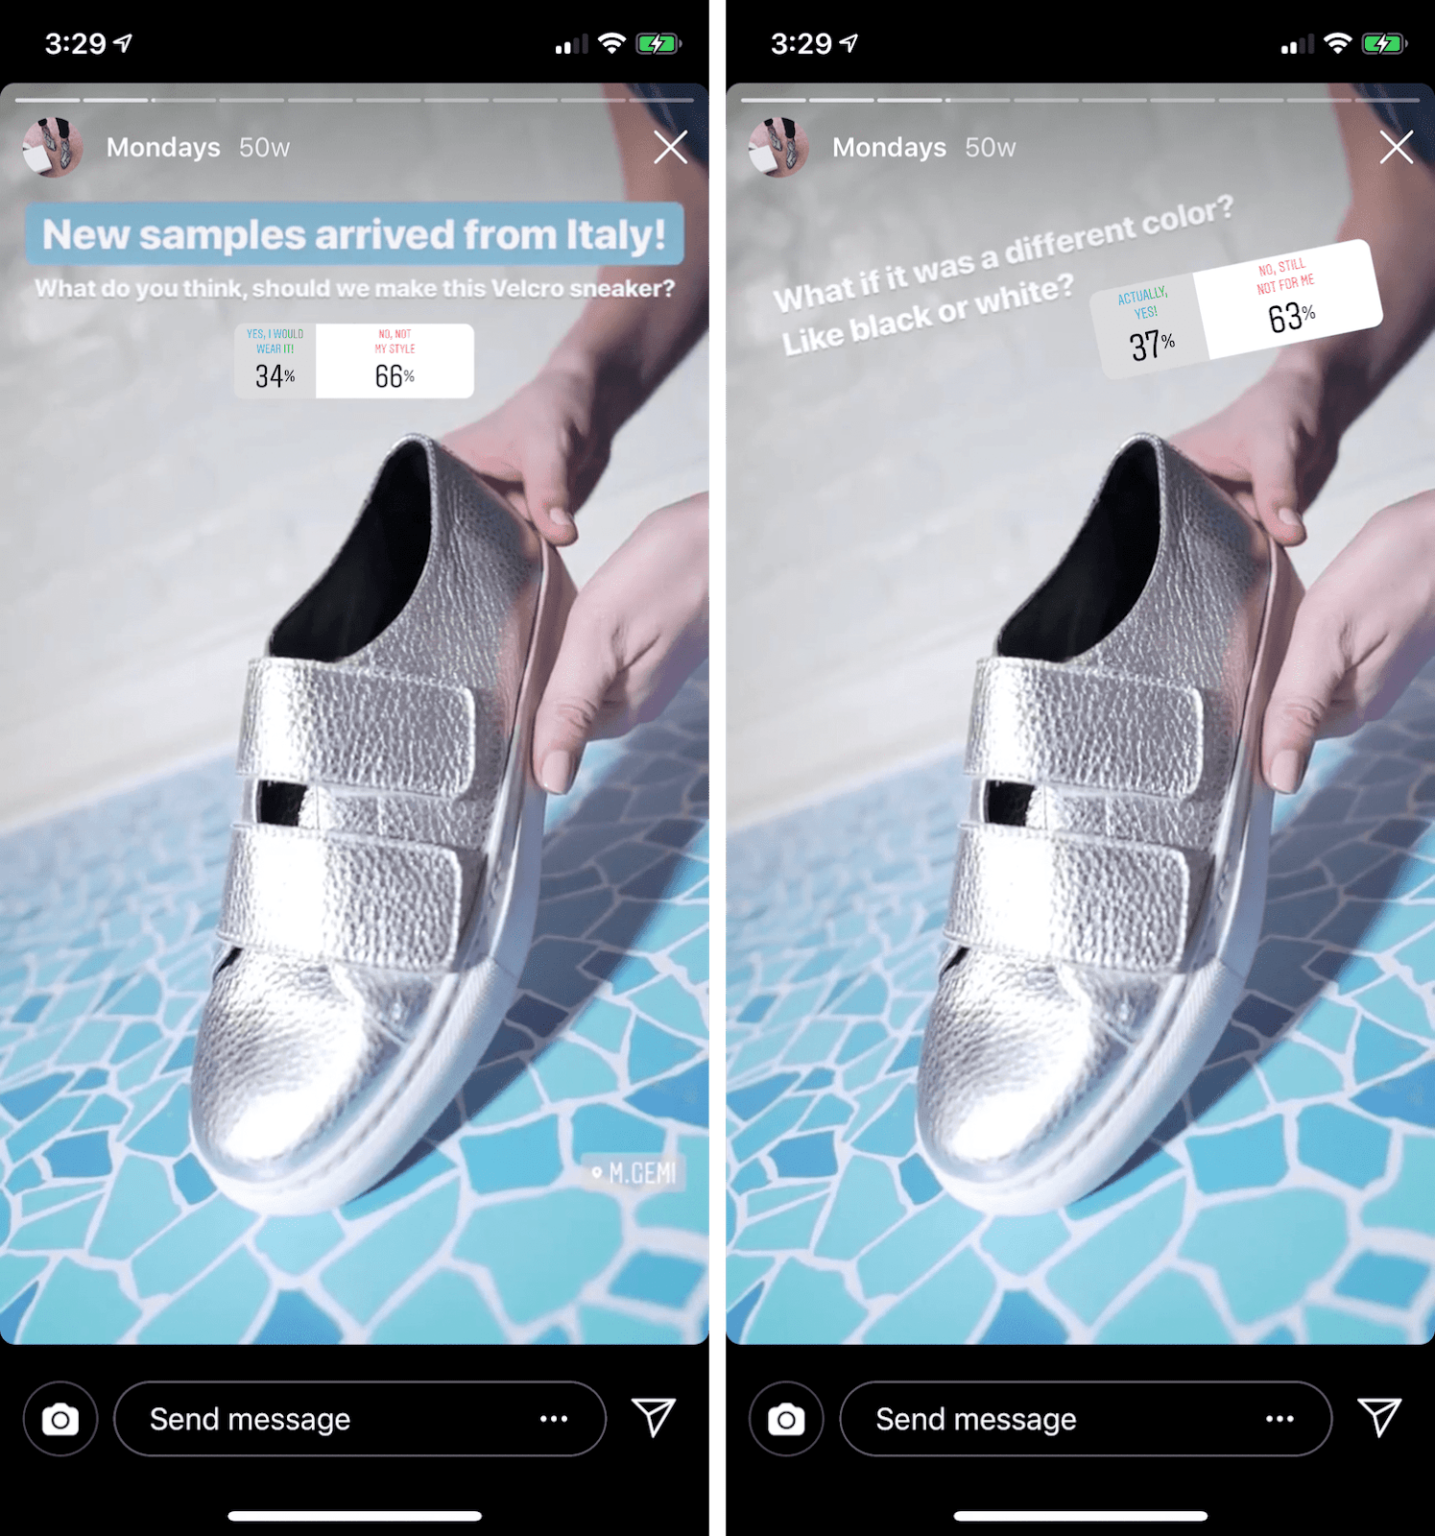 Using questionnaires to improve customer satisfaction - Instagram Polls